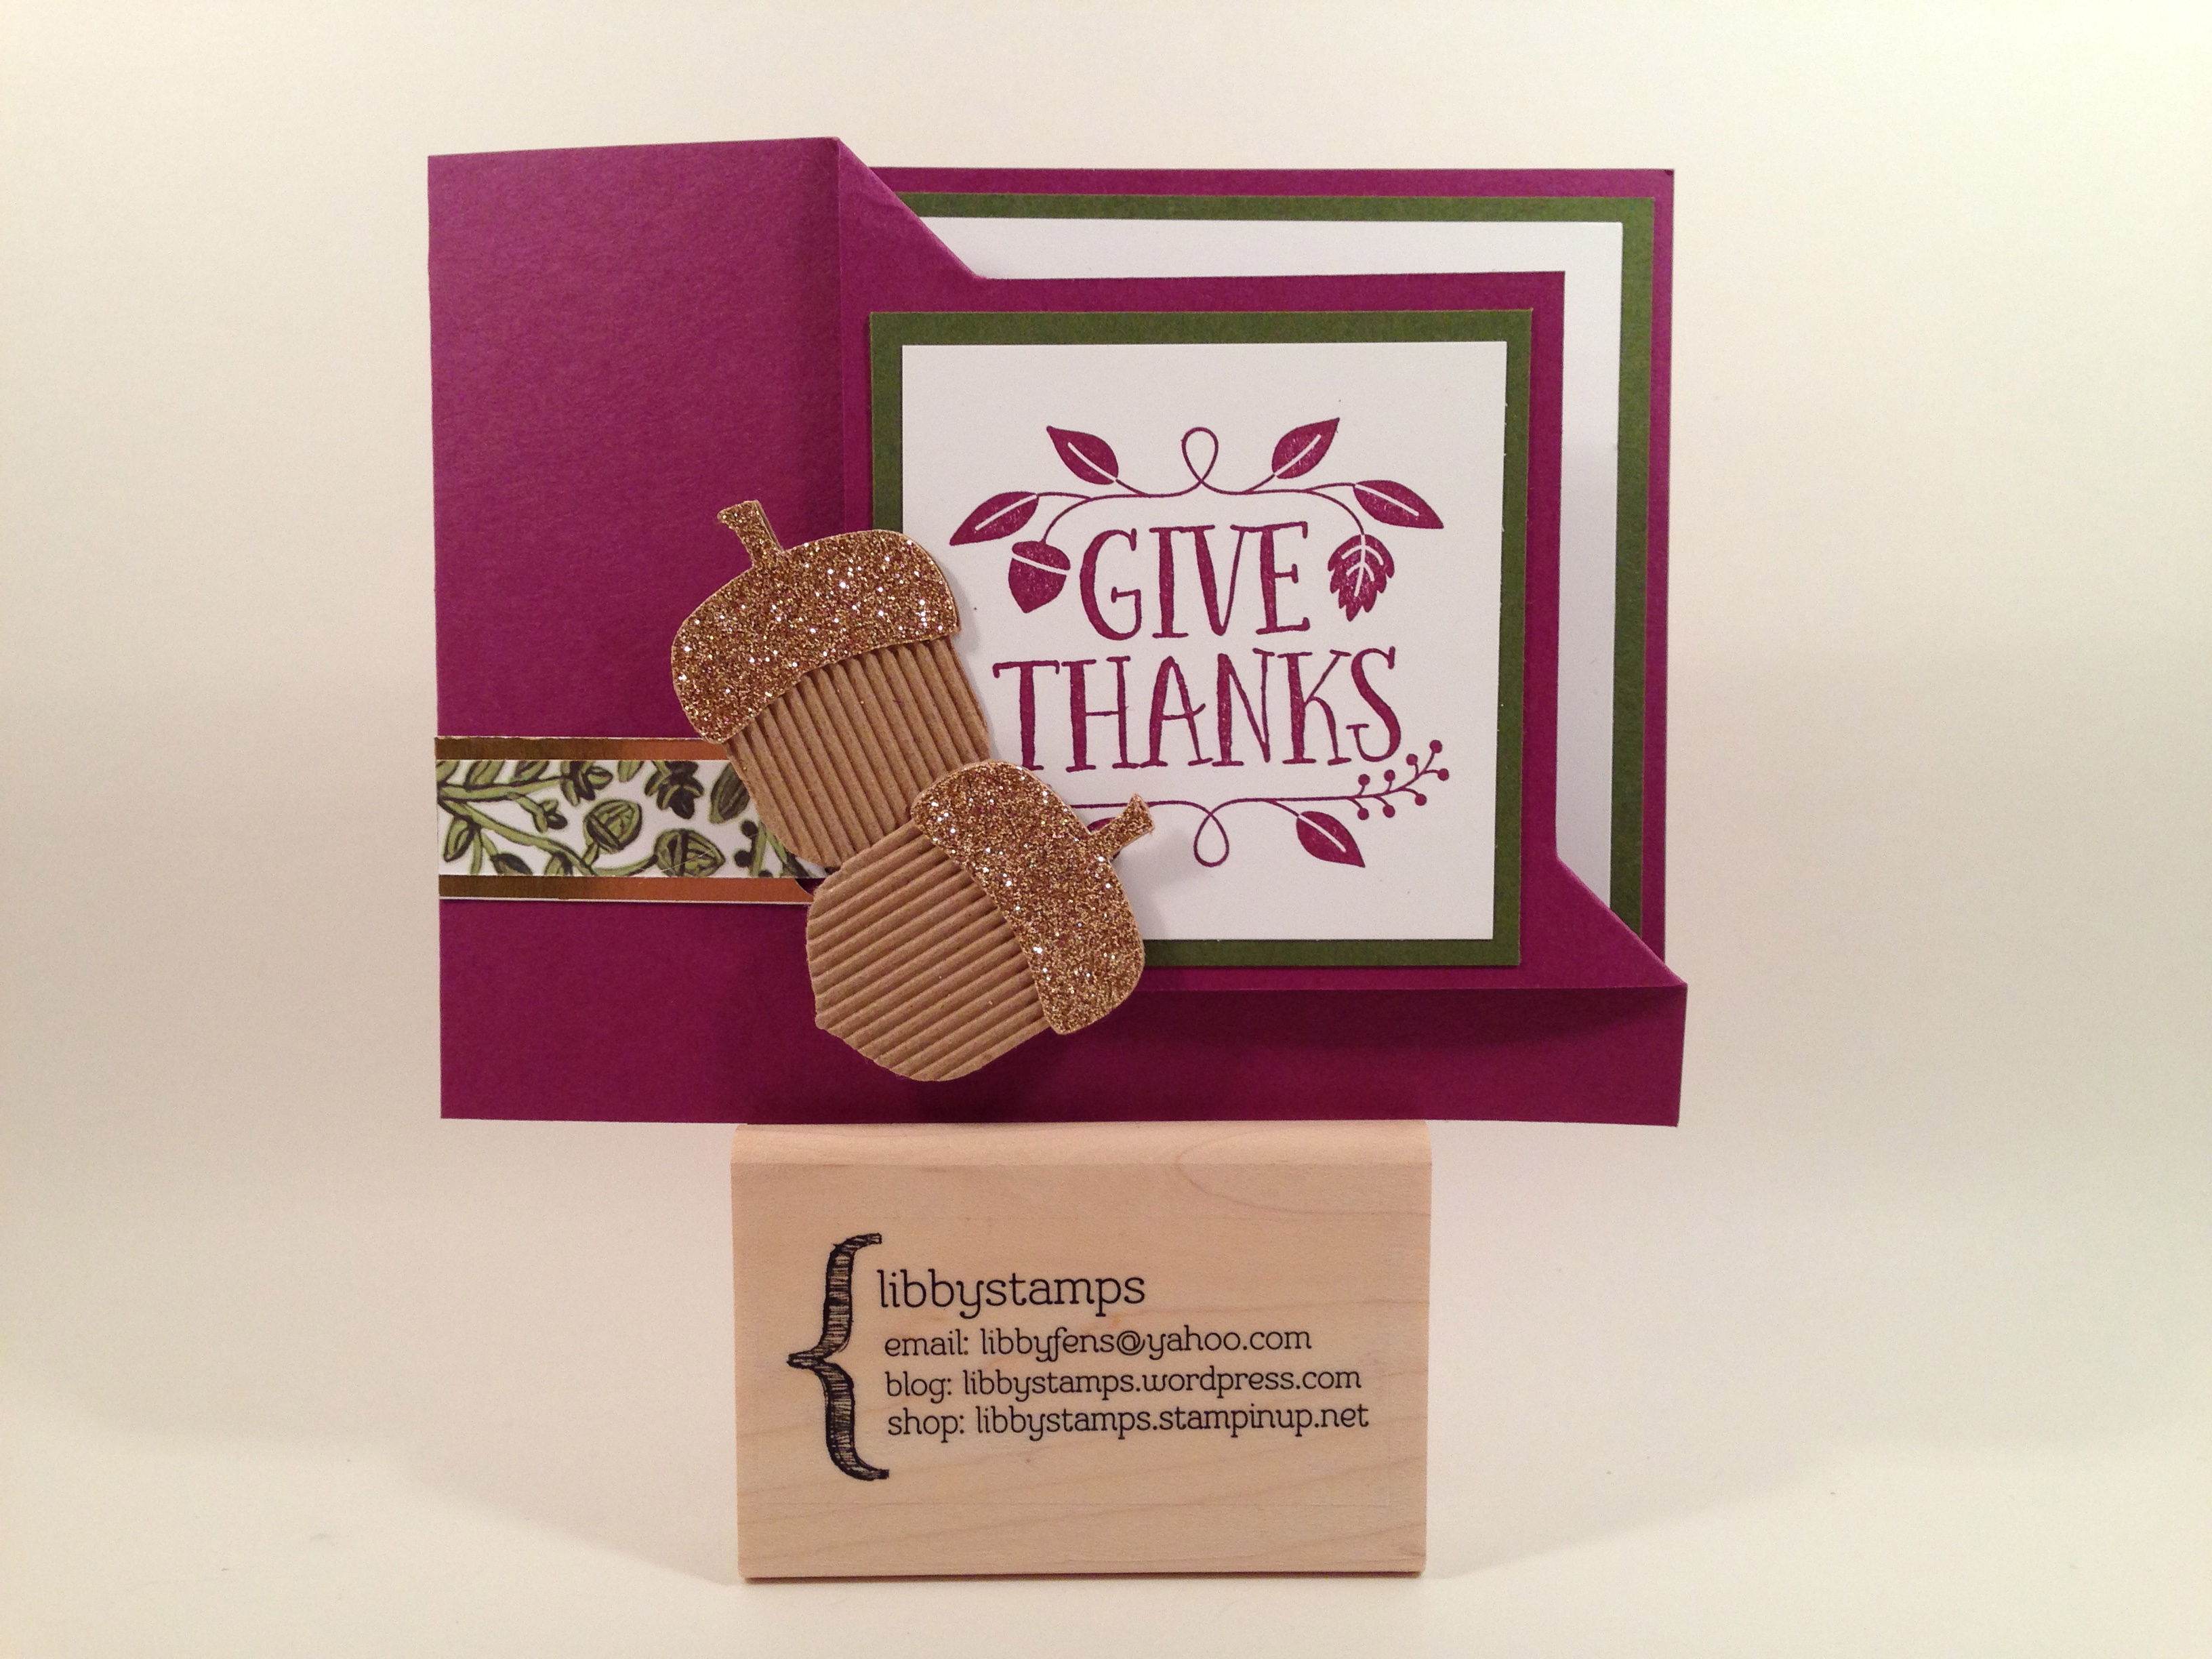 libbystamps, Stampin' Up, Thankful Forest Friends, Acorn Builder Punch, Into the Woods DSP, Gold Foil Sheets, Gold Glimmer Paper, Kraft and White Corrugated Paper, corner flip fold card